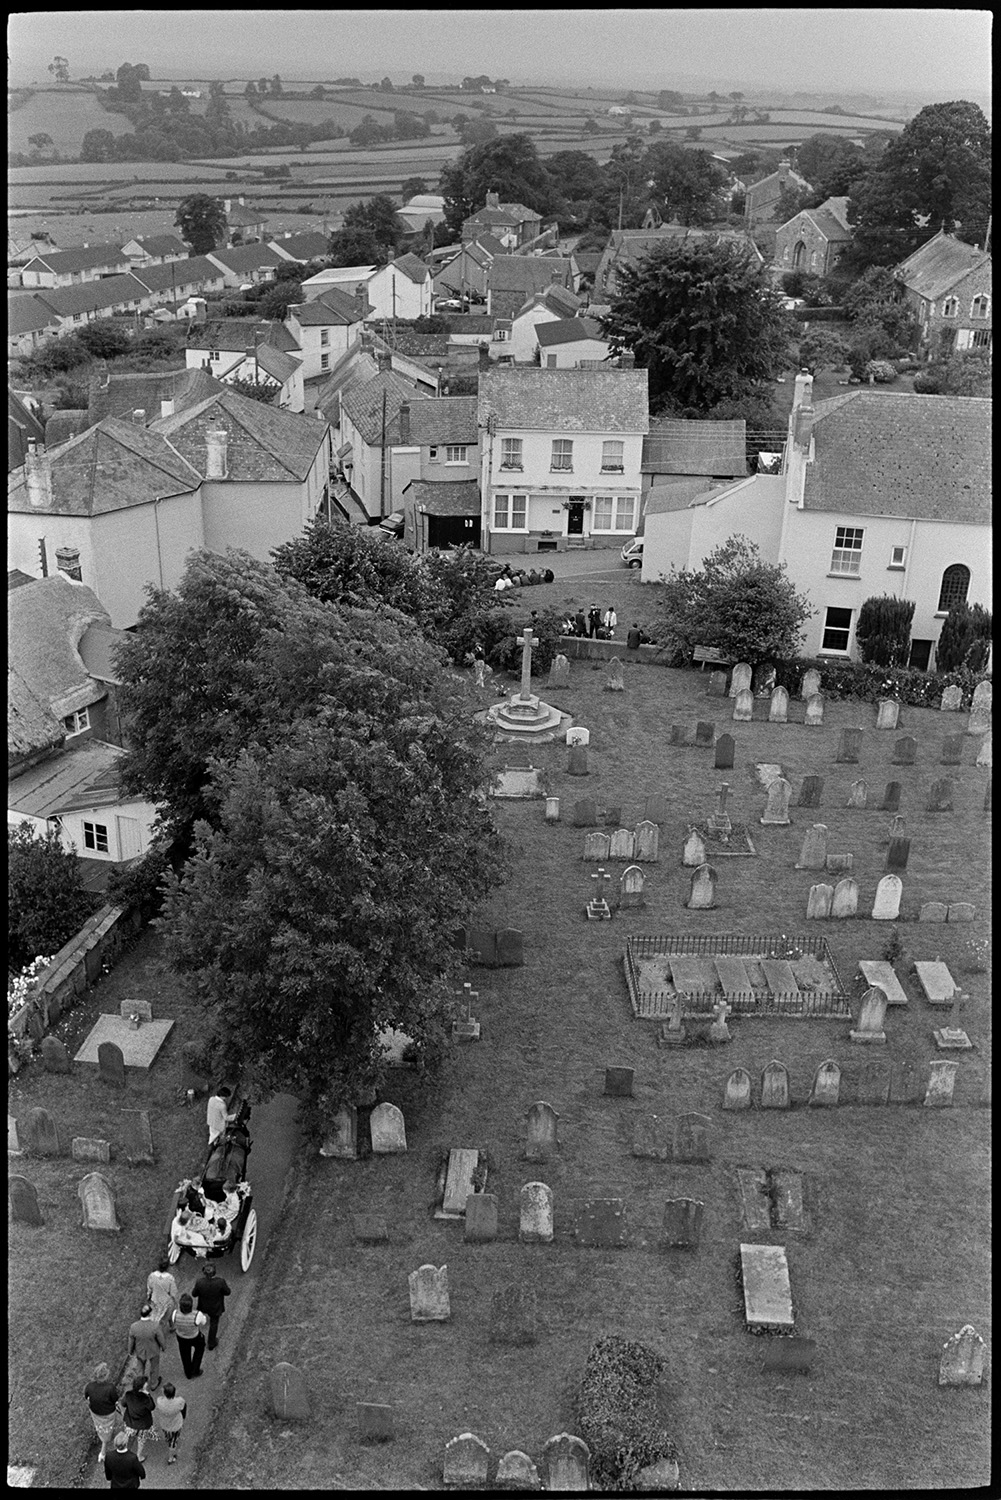 Procession in churchyard with Fair Queen at start of Fair. Graveyard and gravestones. 
[A view taken from Winkleigh Church tower of people processing down the church path before Winkleigh Fair. They are following the Winkleigh Fair Queen in a horse drawn carriage. Gravestones in the churchyard, the war memorial and houses in the village can be seen.]